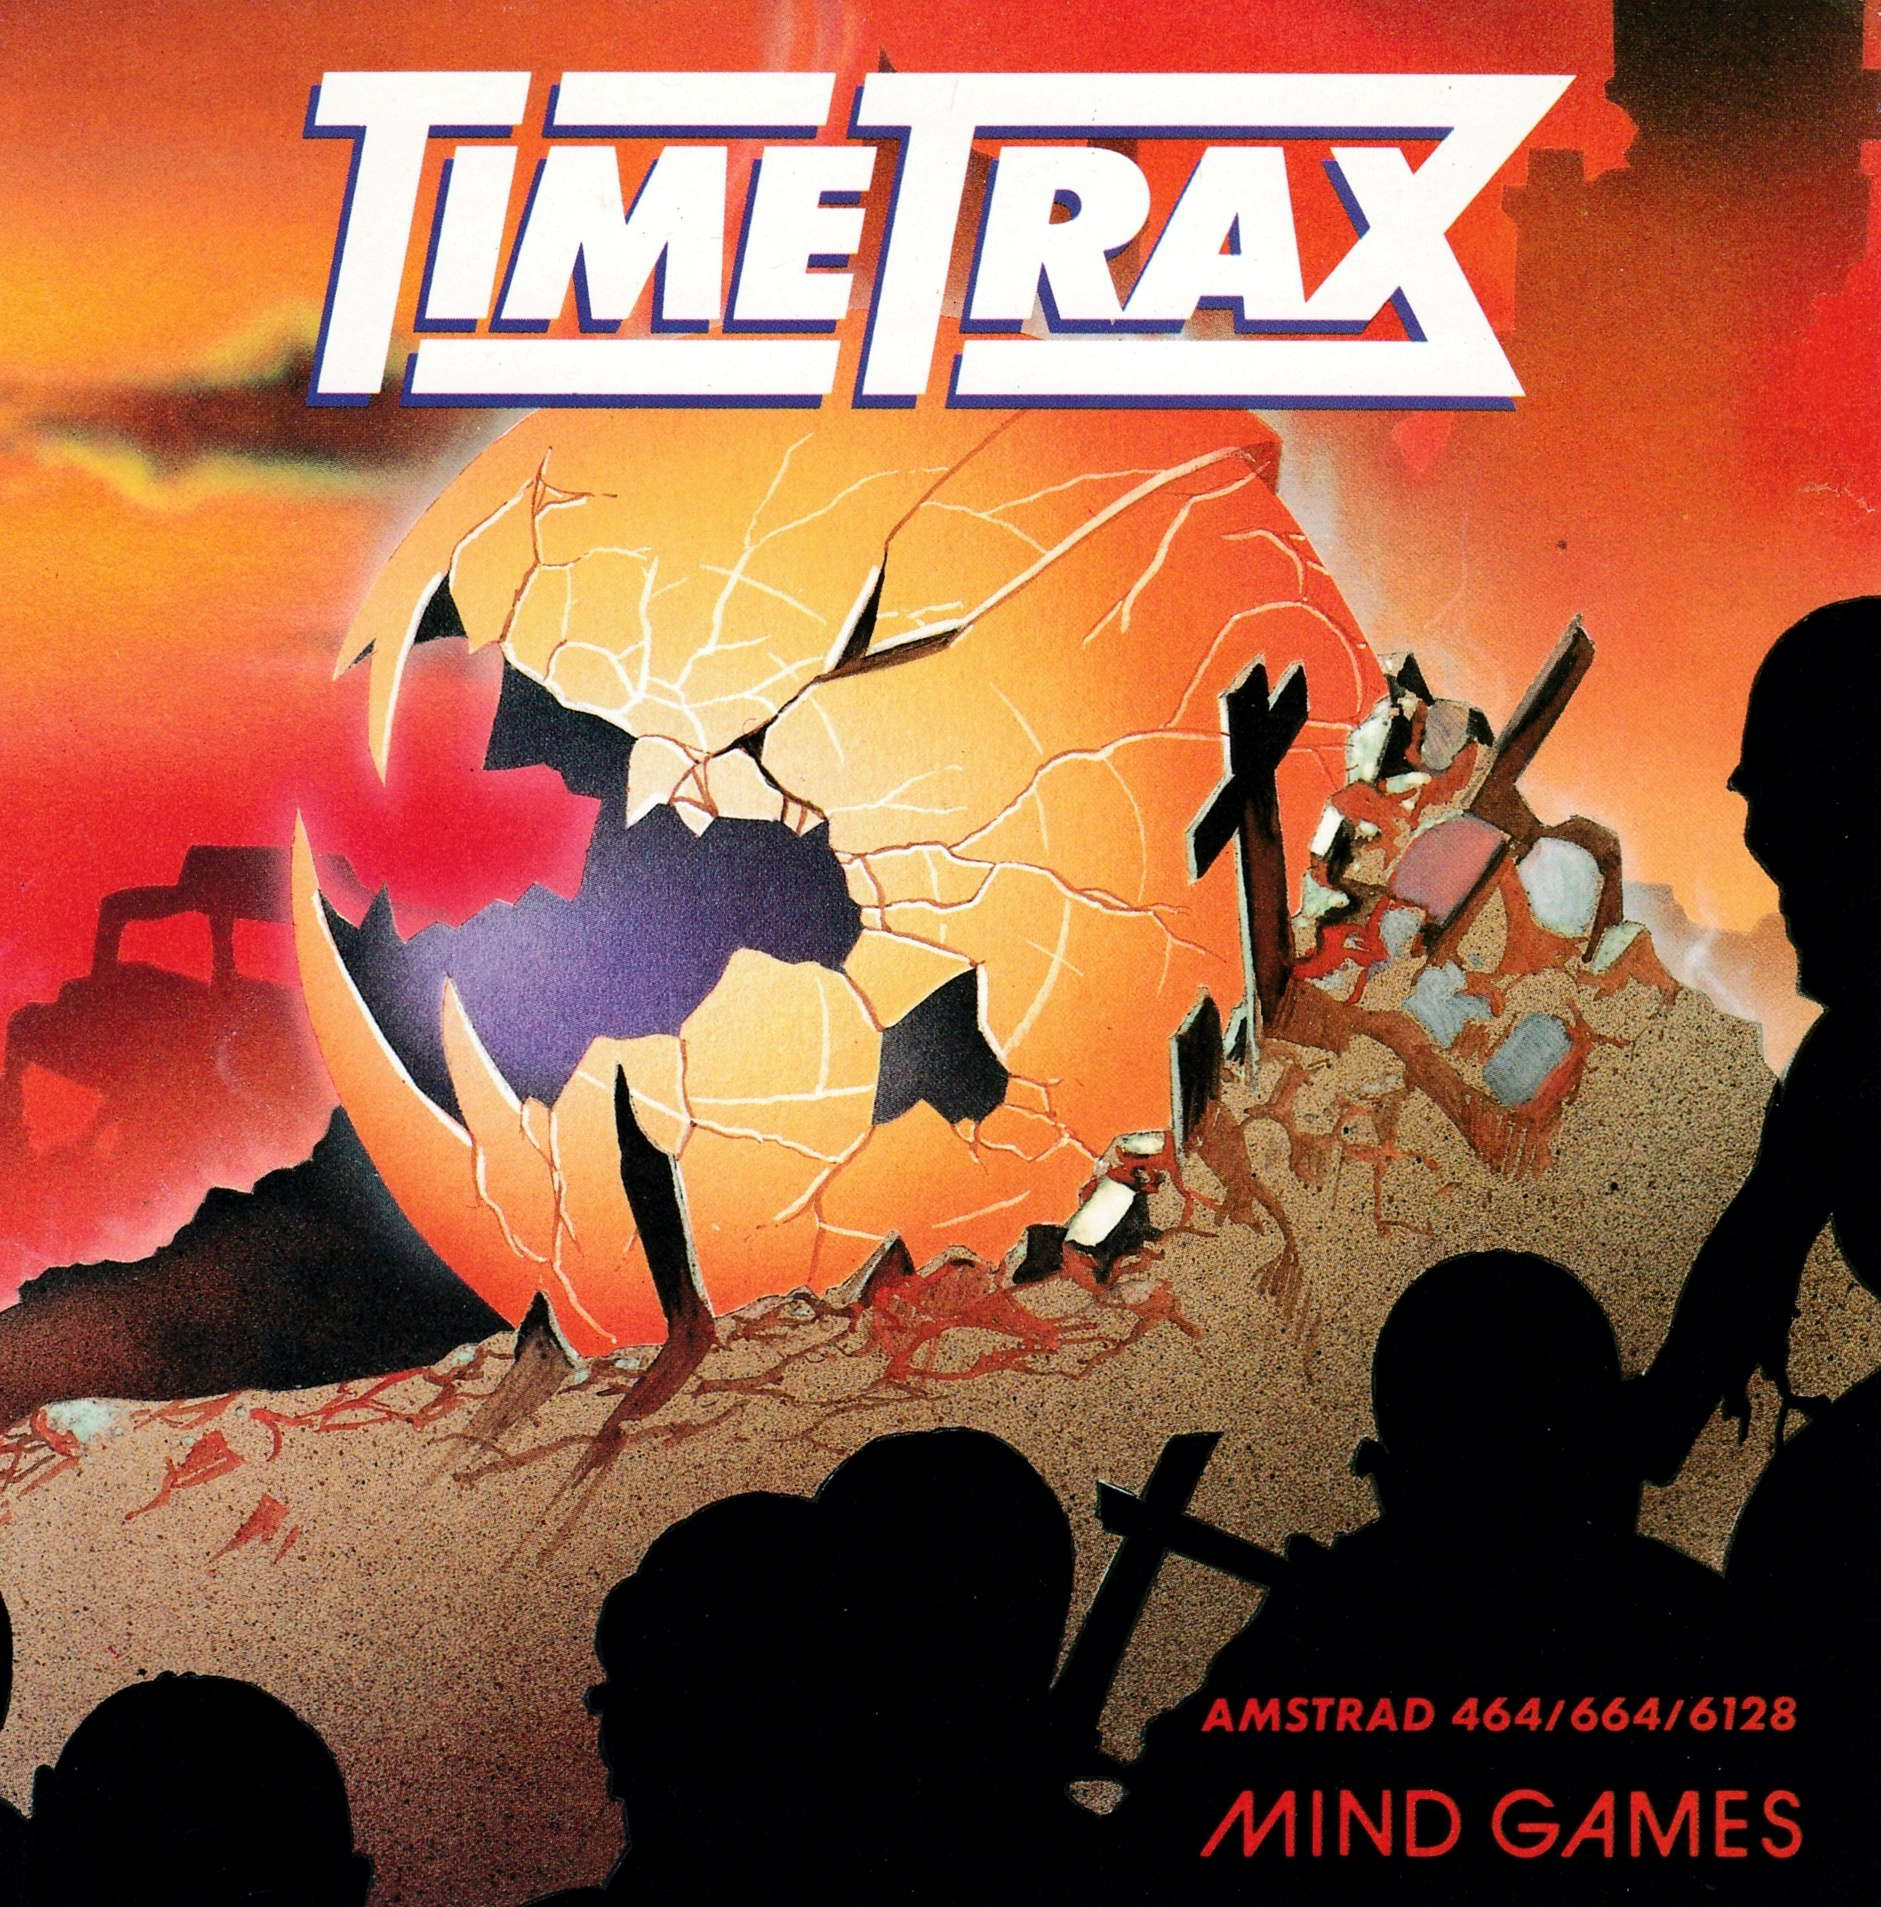 cover of the Amstrad CPC game Timetrax  by GameBase CPC